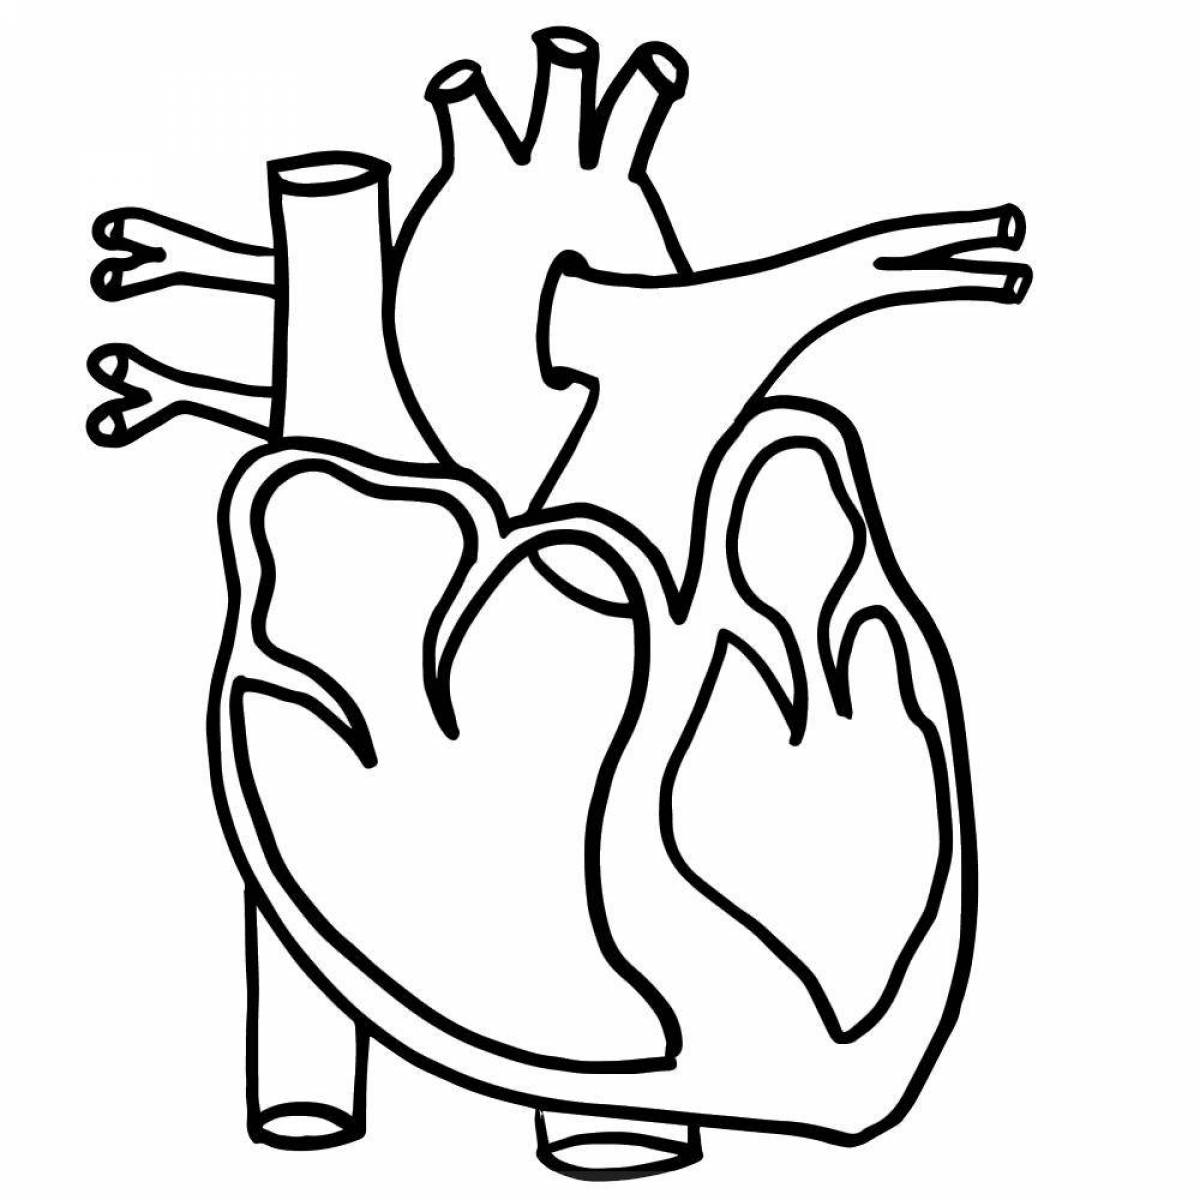 Glowing human heart coloring page